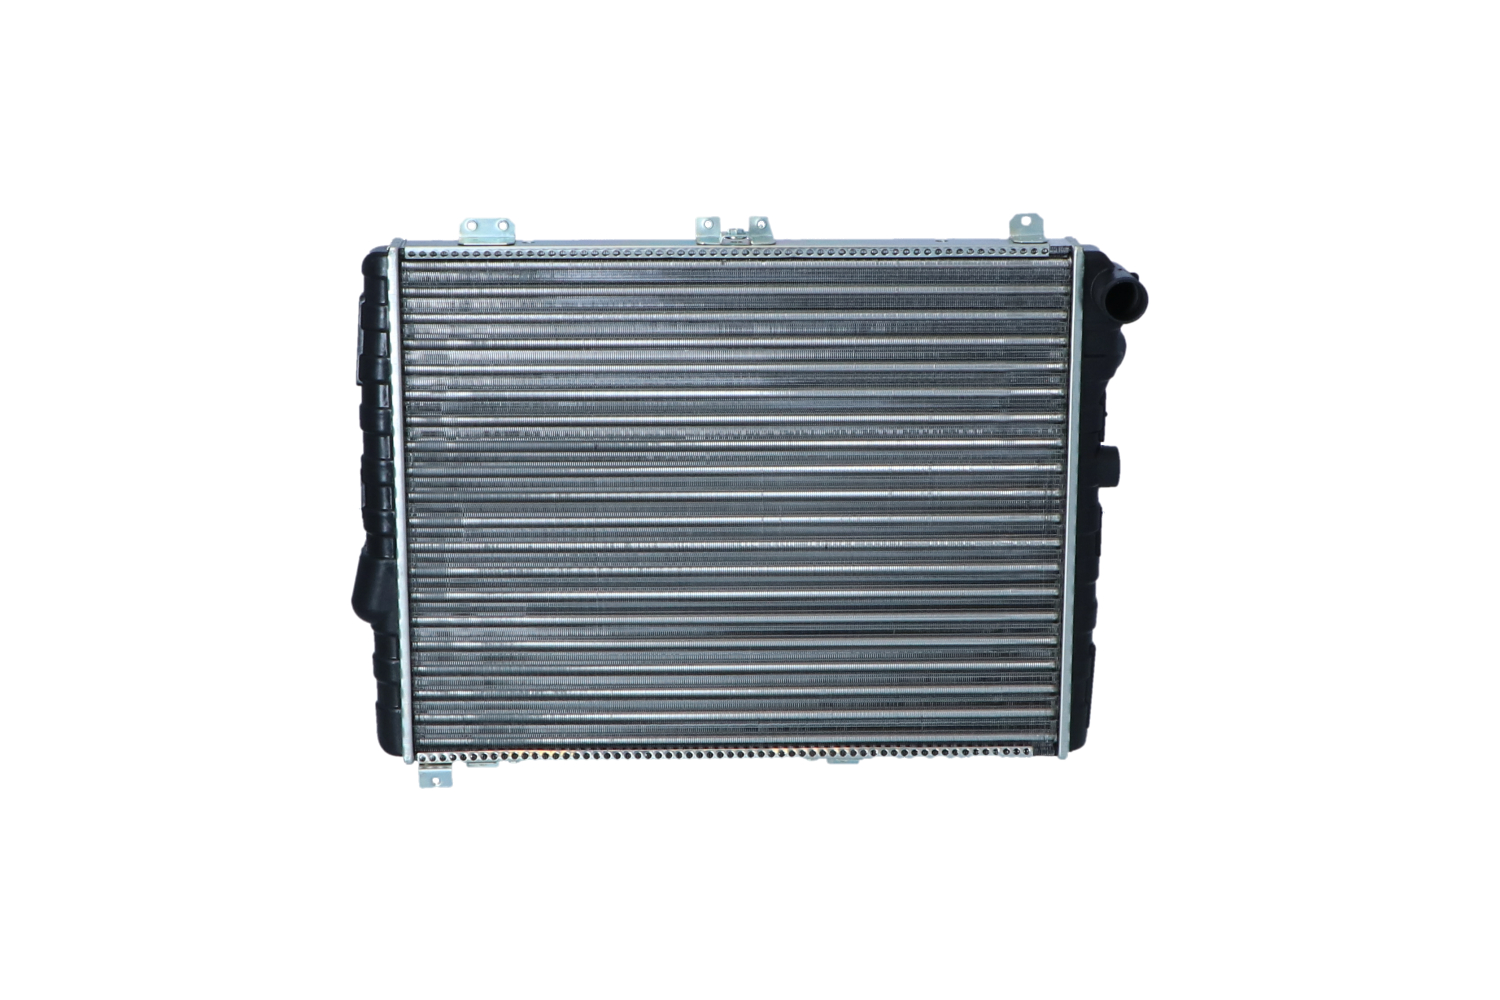 NRF 58579 Engine radiator Aluminium, 470 x 378 x 34 mm, Mechanically jointed cooling fins